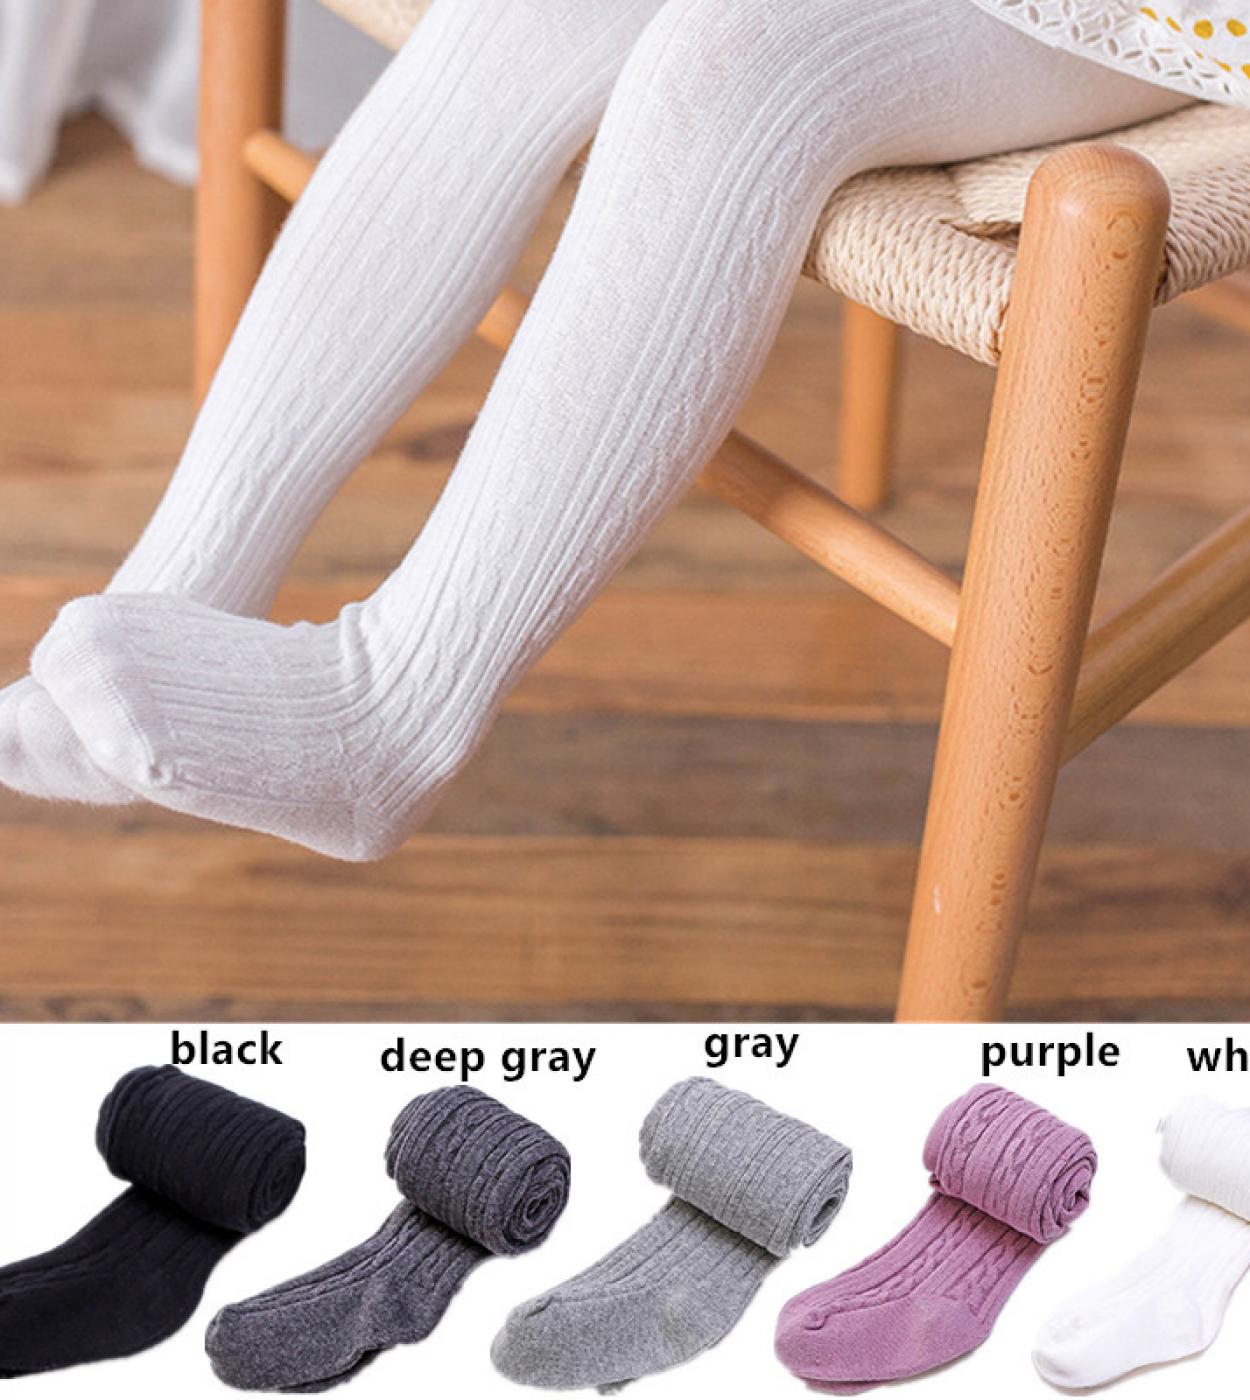 Winter Knitted Tights For Girl Cotton Elastic Girls Leggings 2 8 10 Year Kids Warm Stockings Children Solid Breathable P